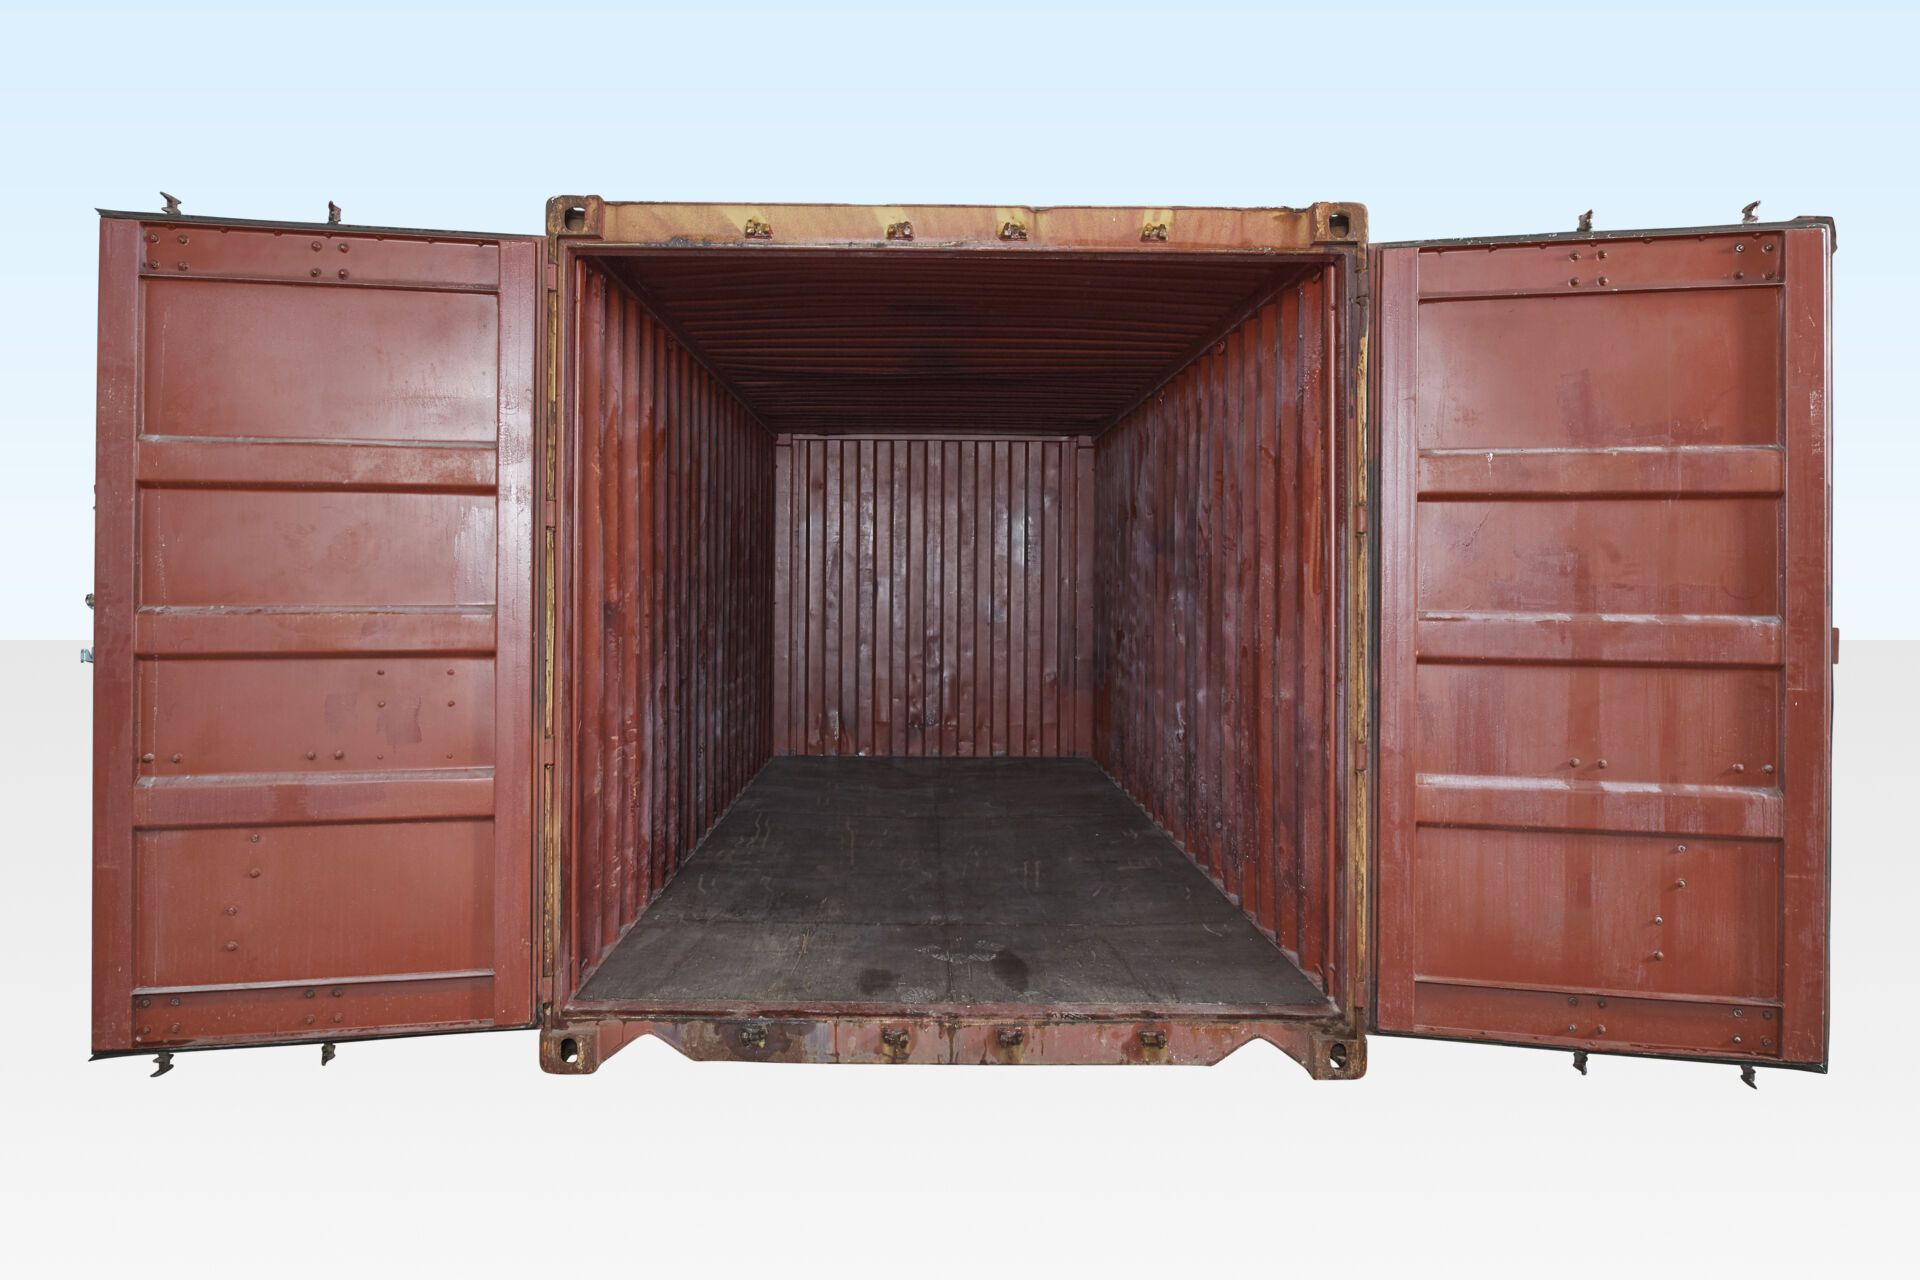 20ft Cheap Used Shipping Container - Portable Space